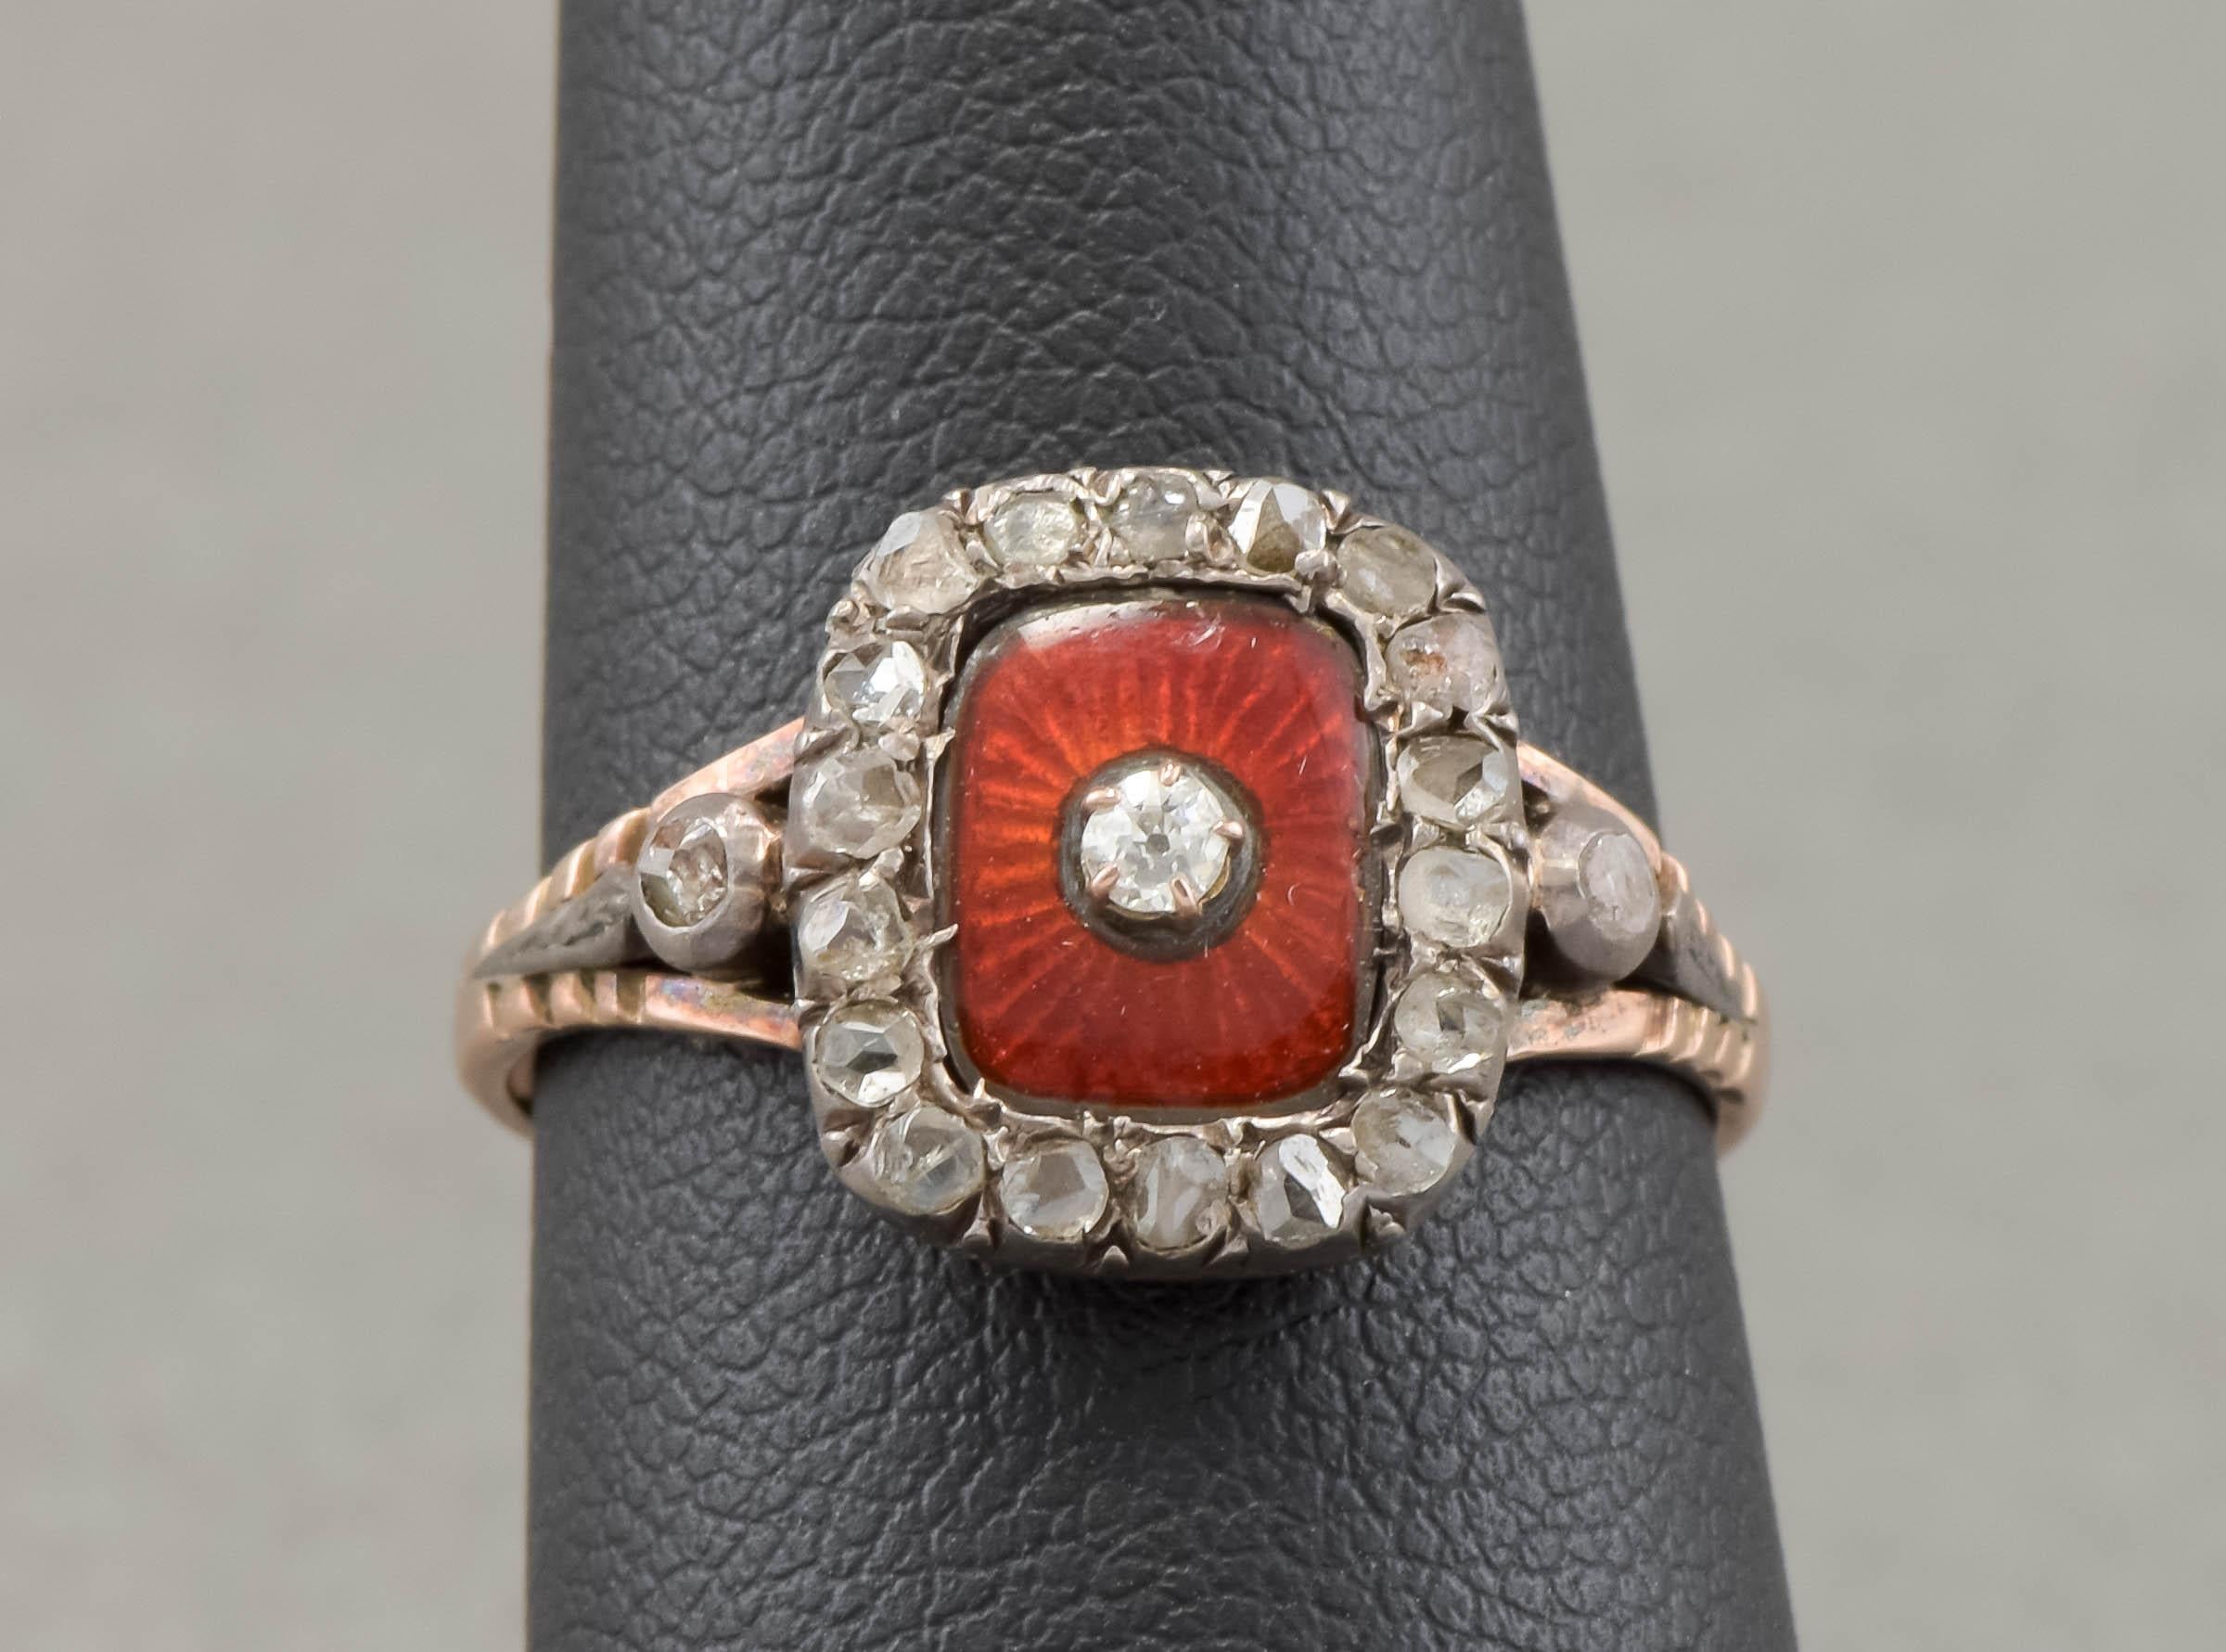 Women's Antique Diamond & Scarlet Guilloche Enamel Ring with Provenance For Sale